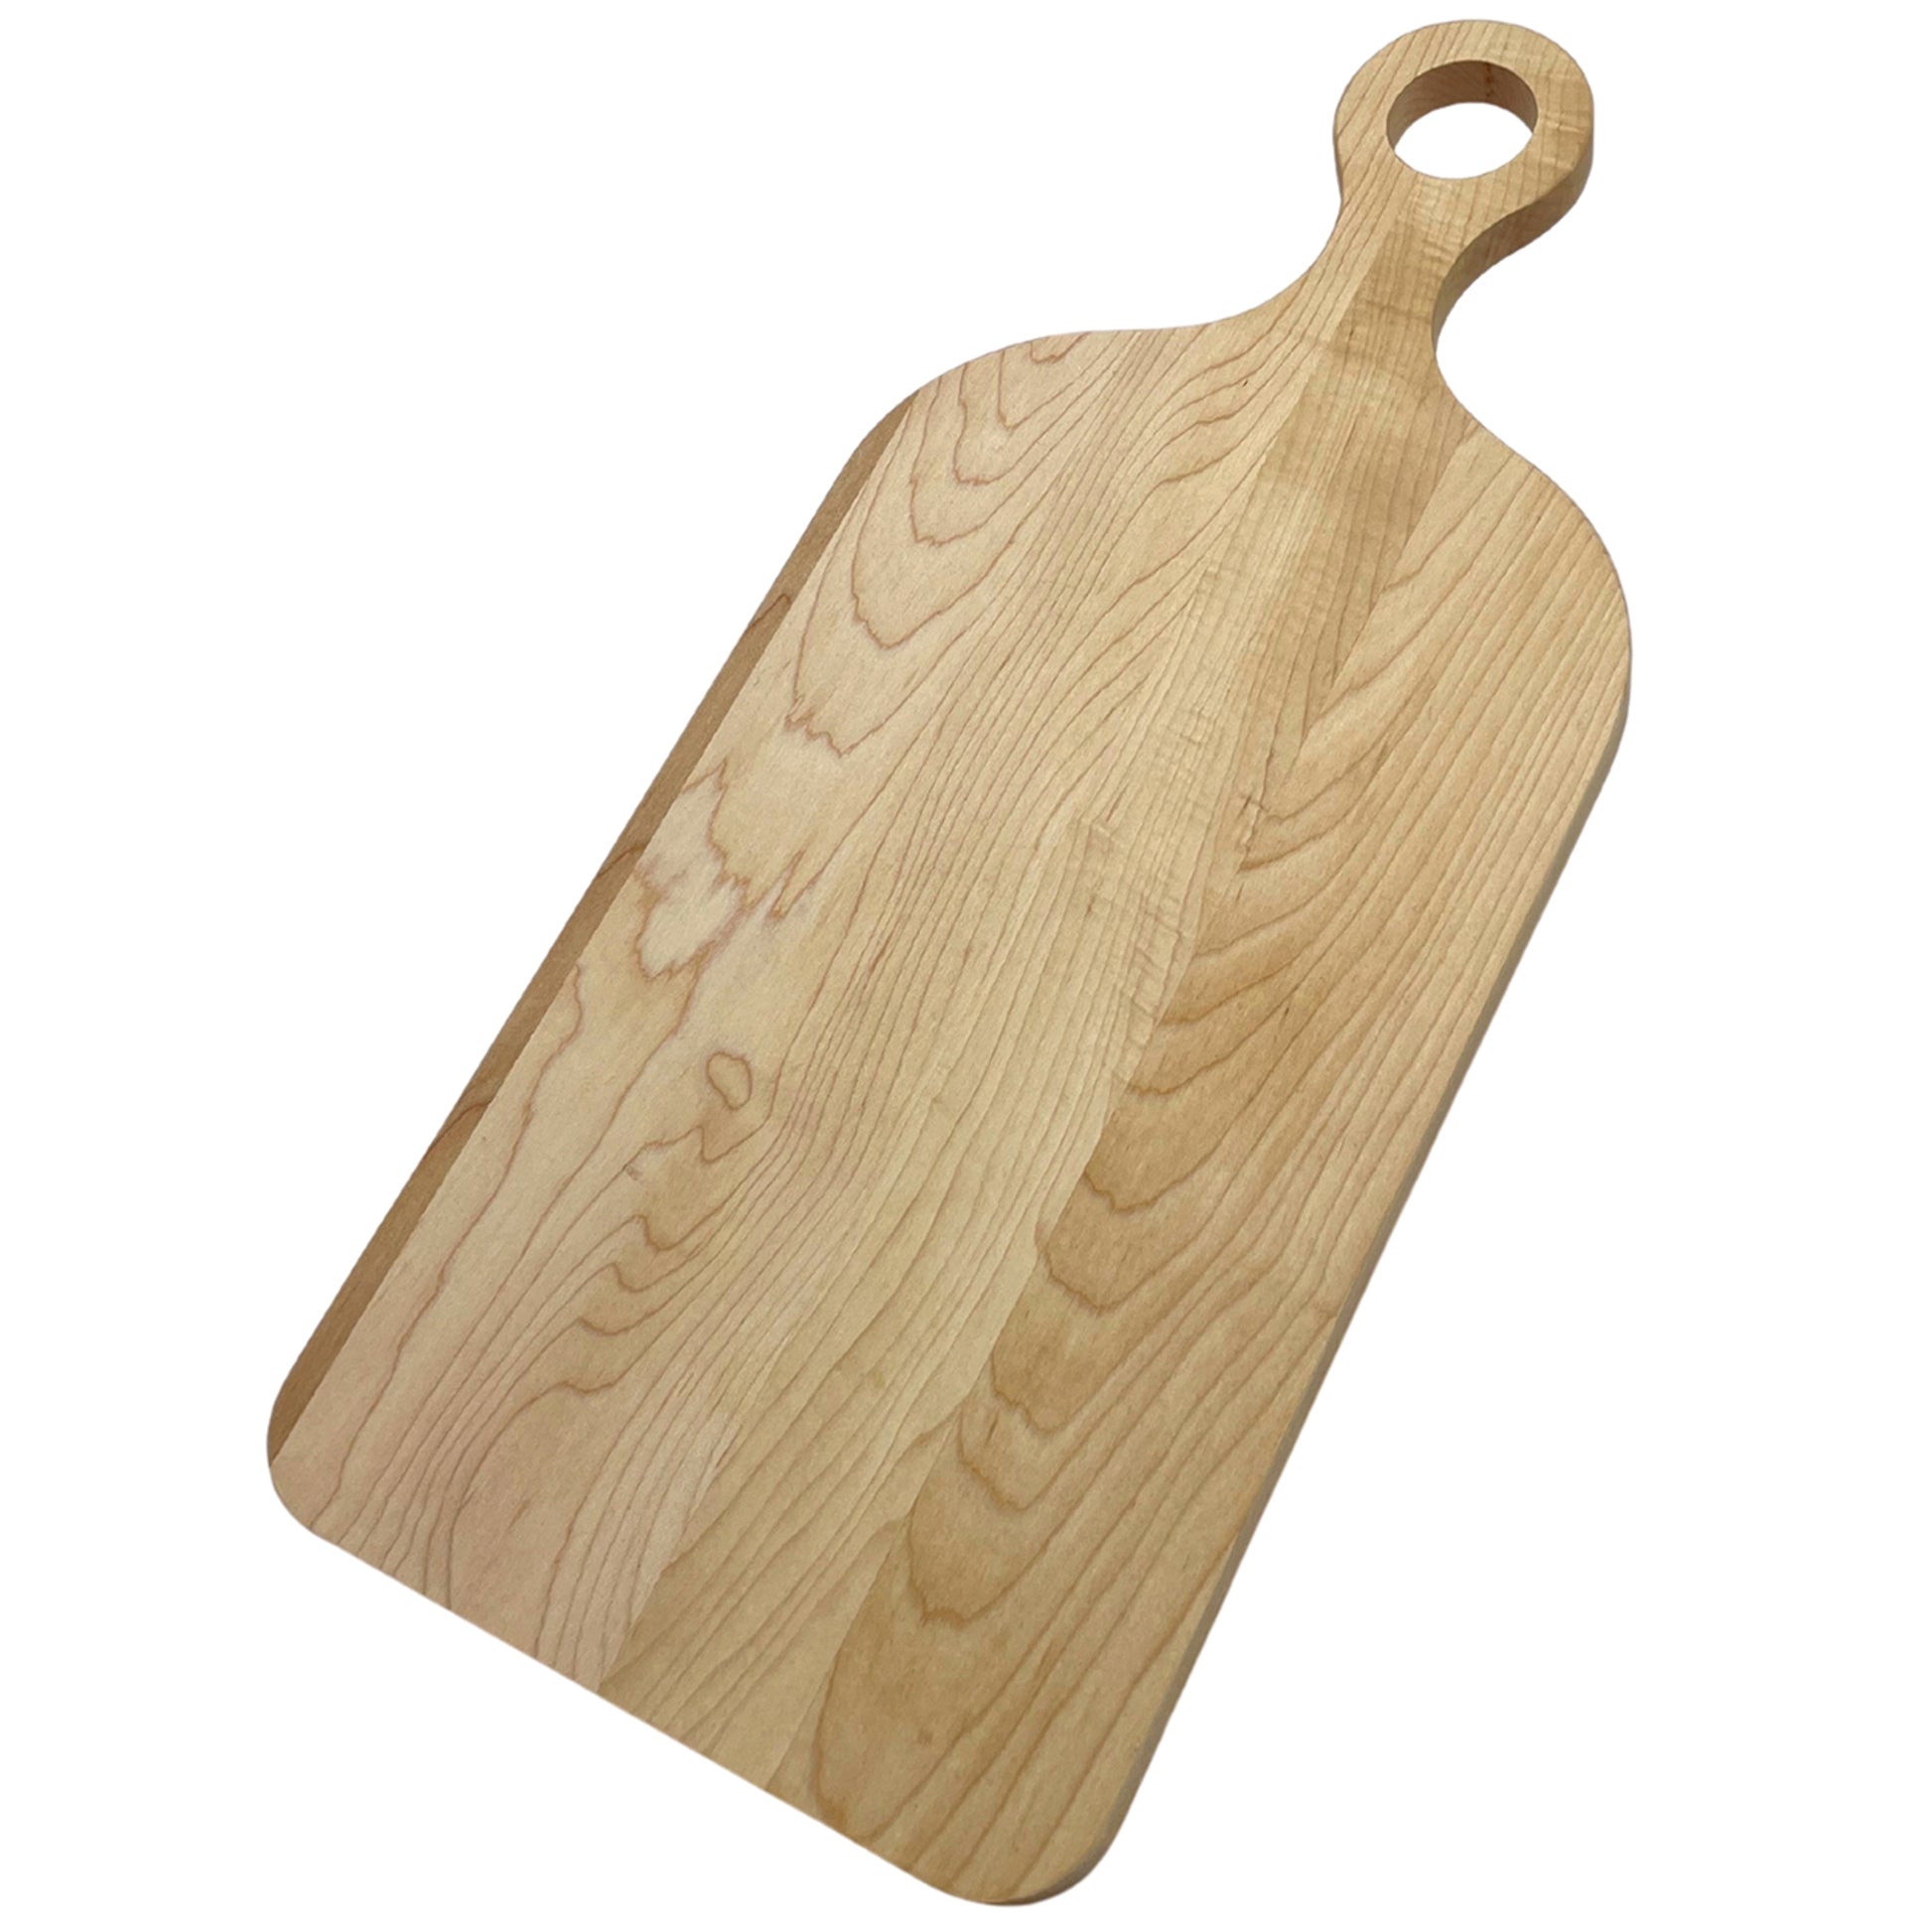 Maple Paddle Board-18" x 8"